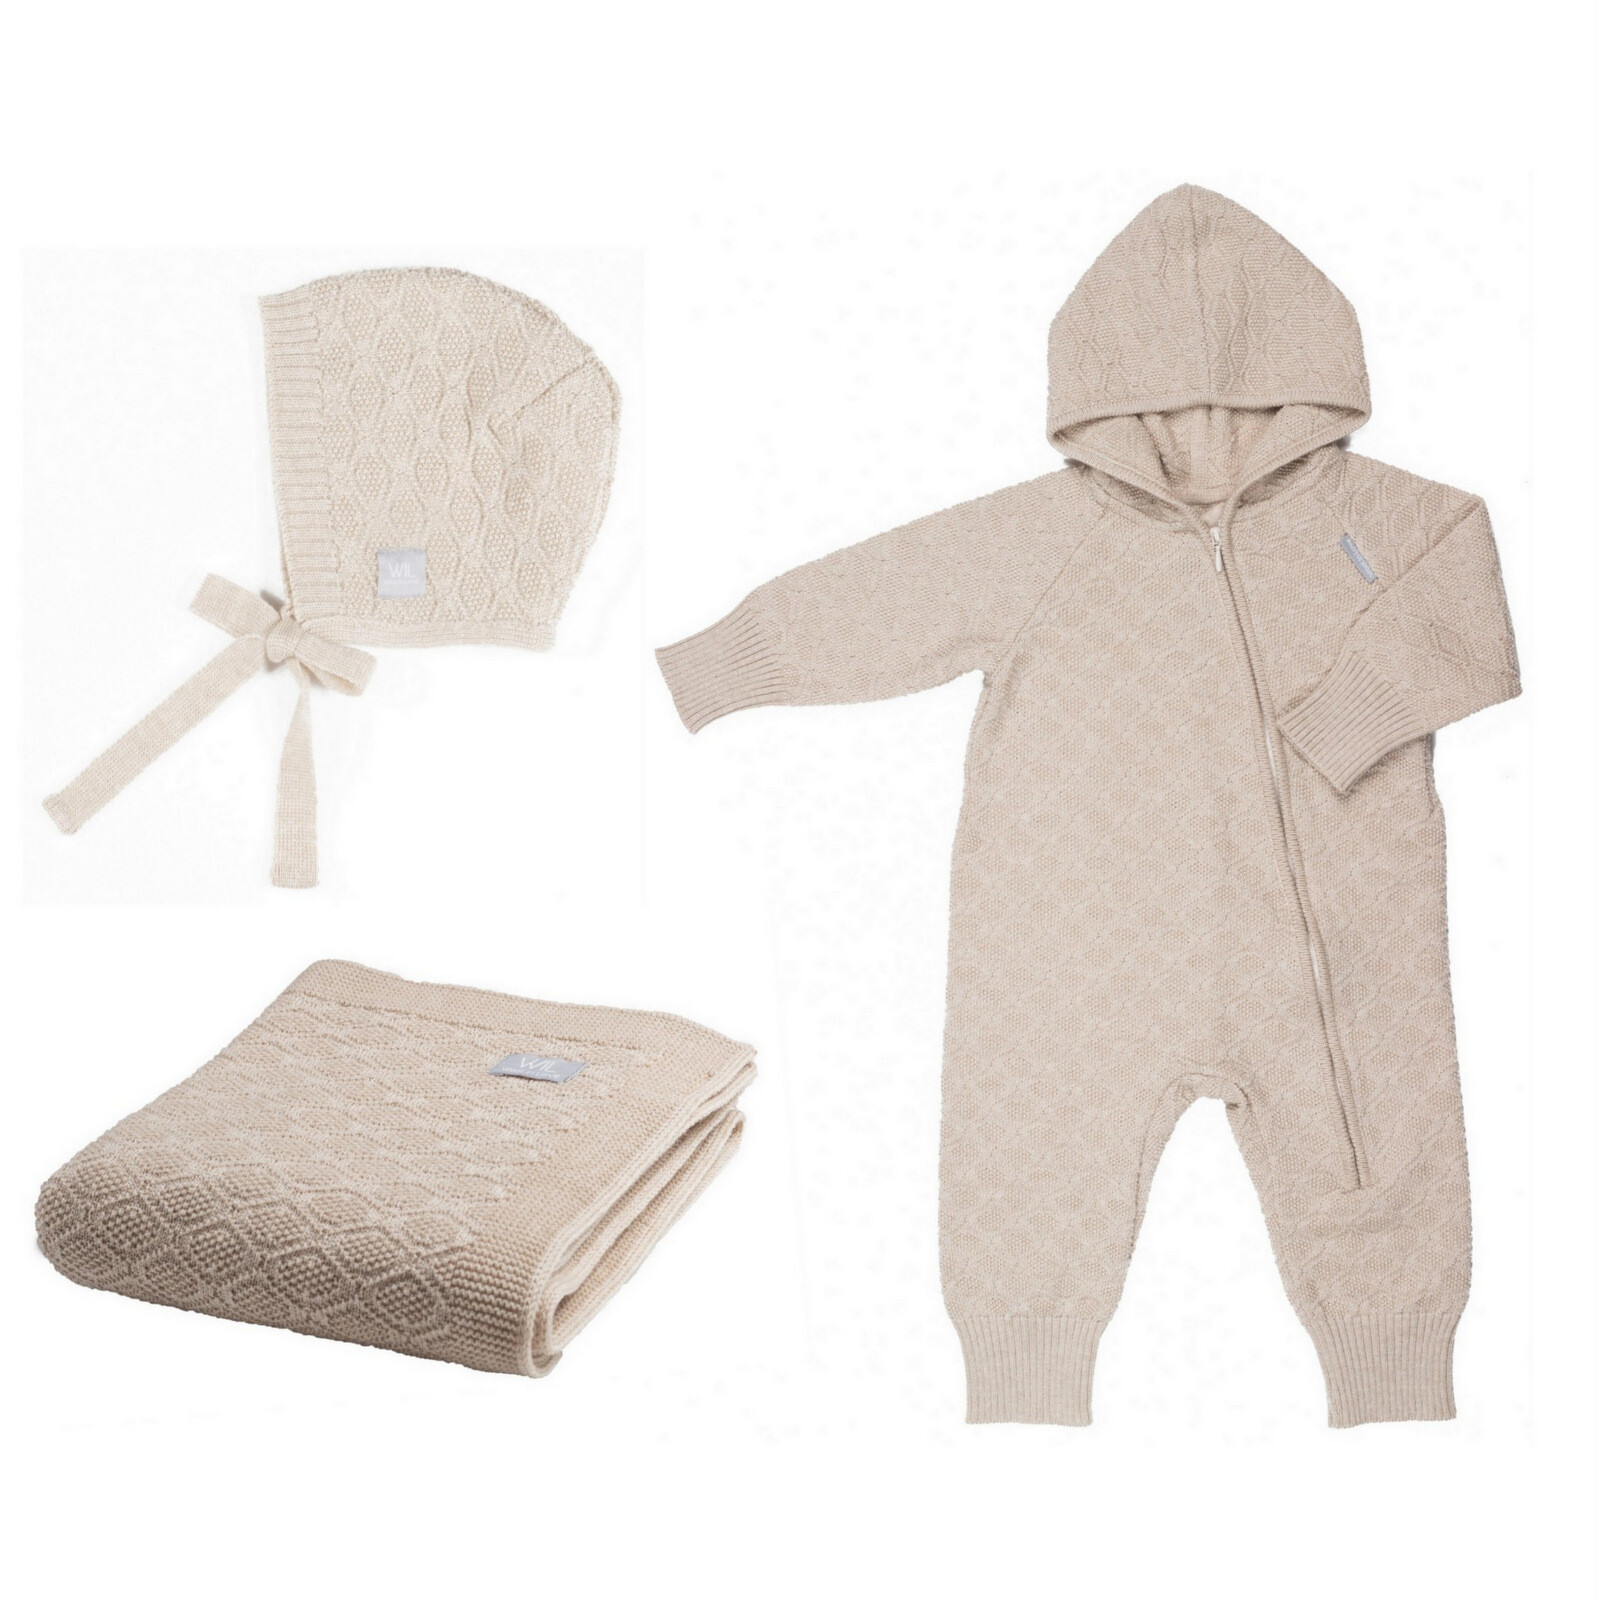 LARGE BABY GIFT SET HAPPINESS (baby blanket, jumpsuit & bonnet)